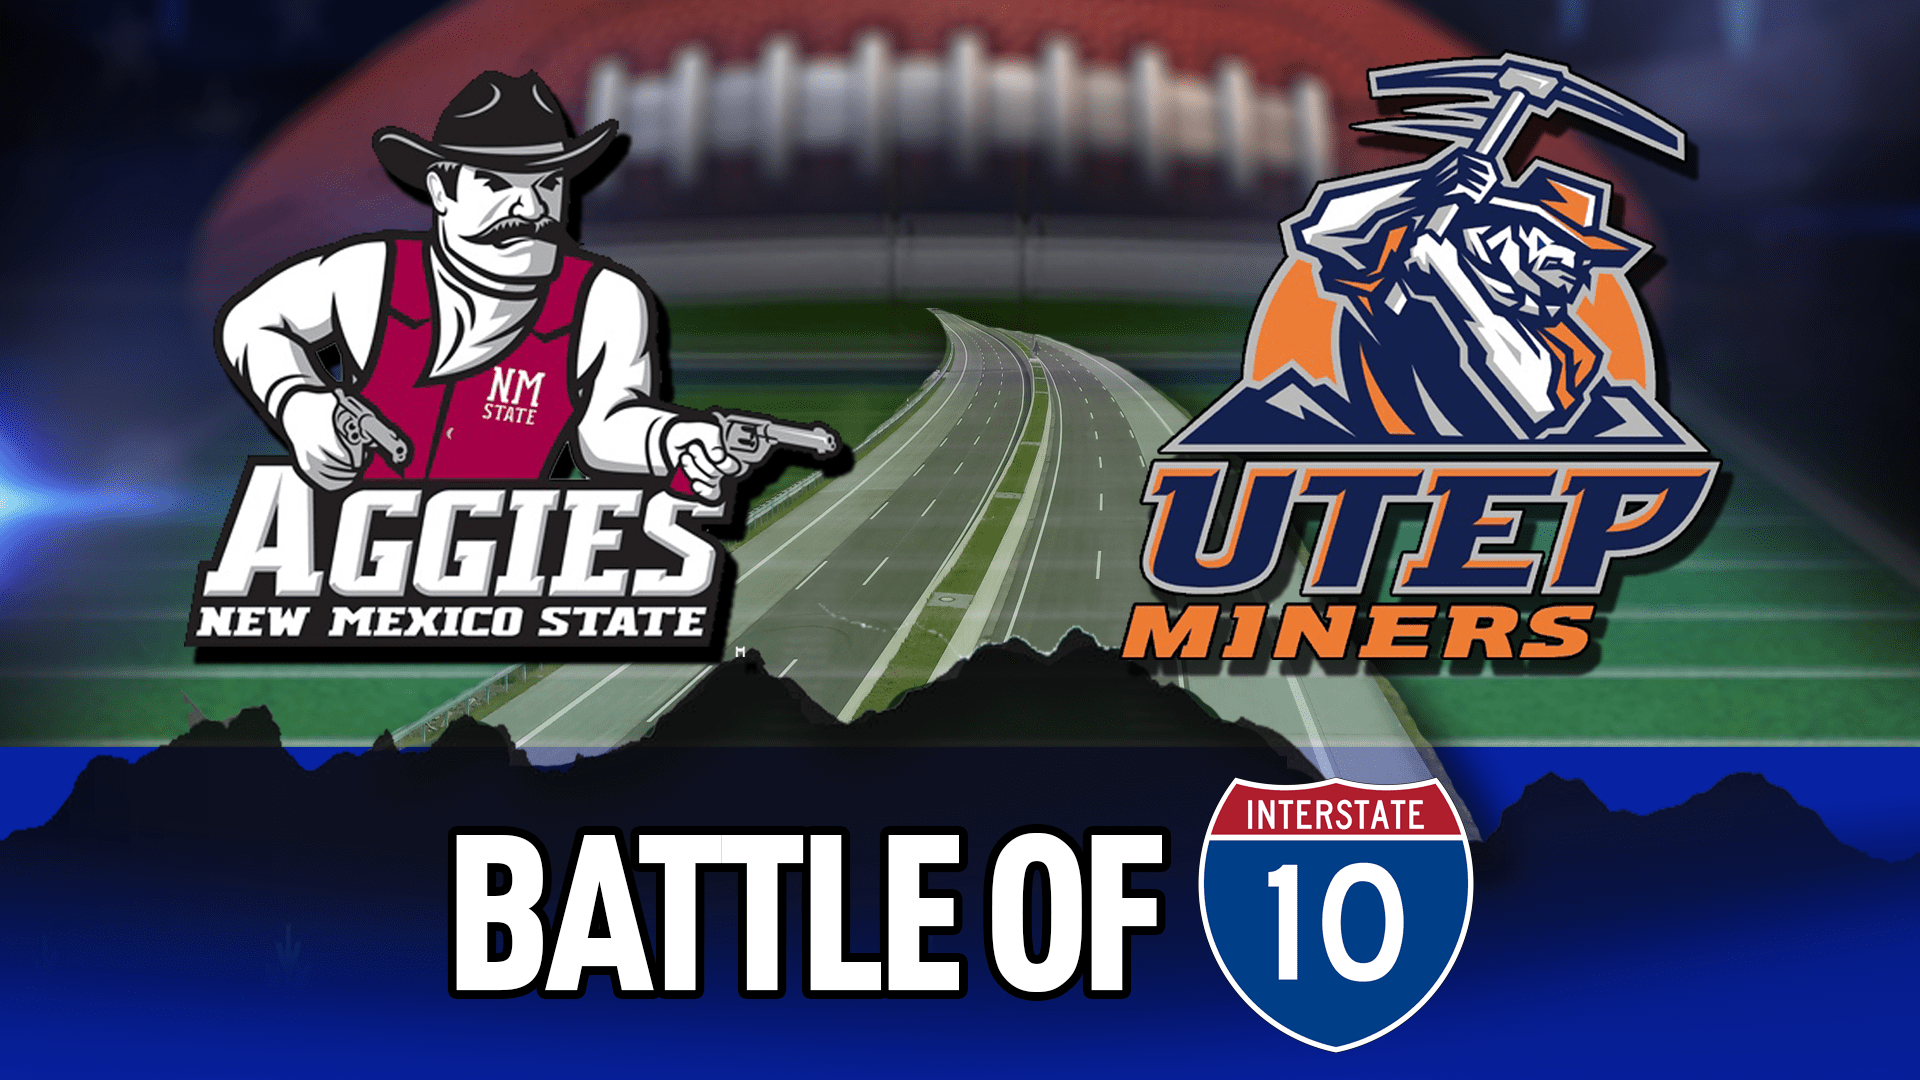 Nmsu Aggies Defeat Utep Miners In Battle Of I